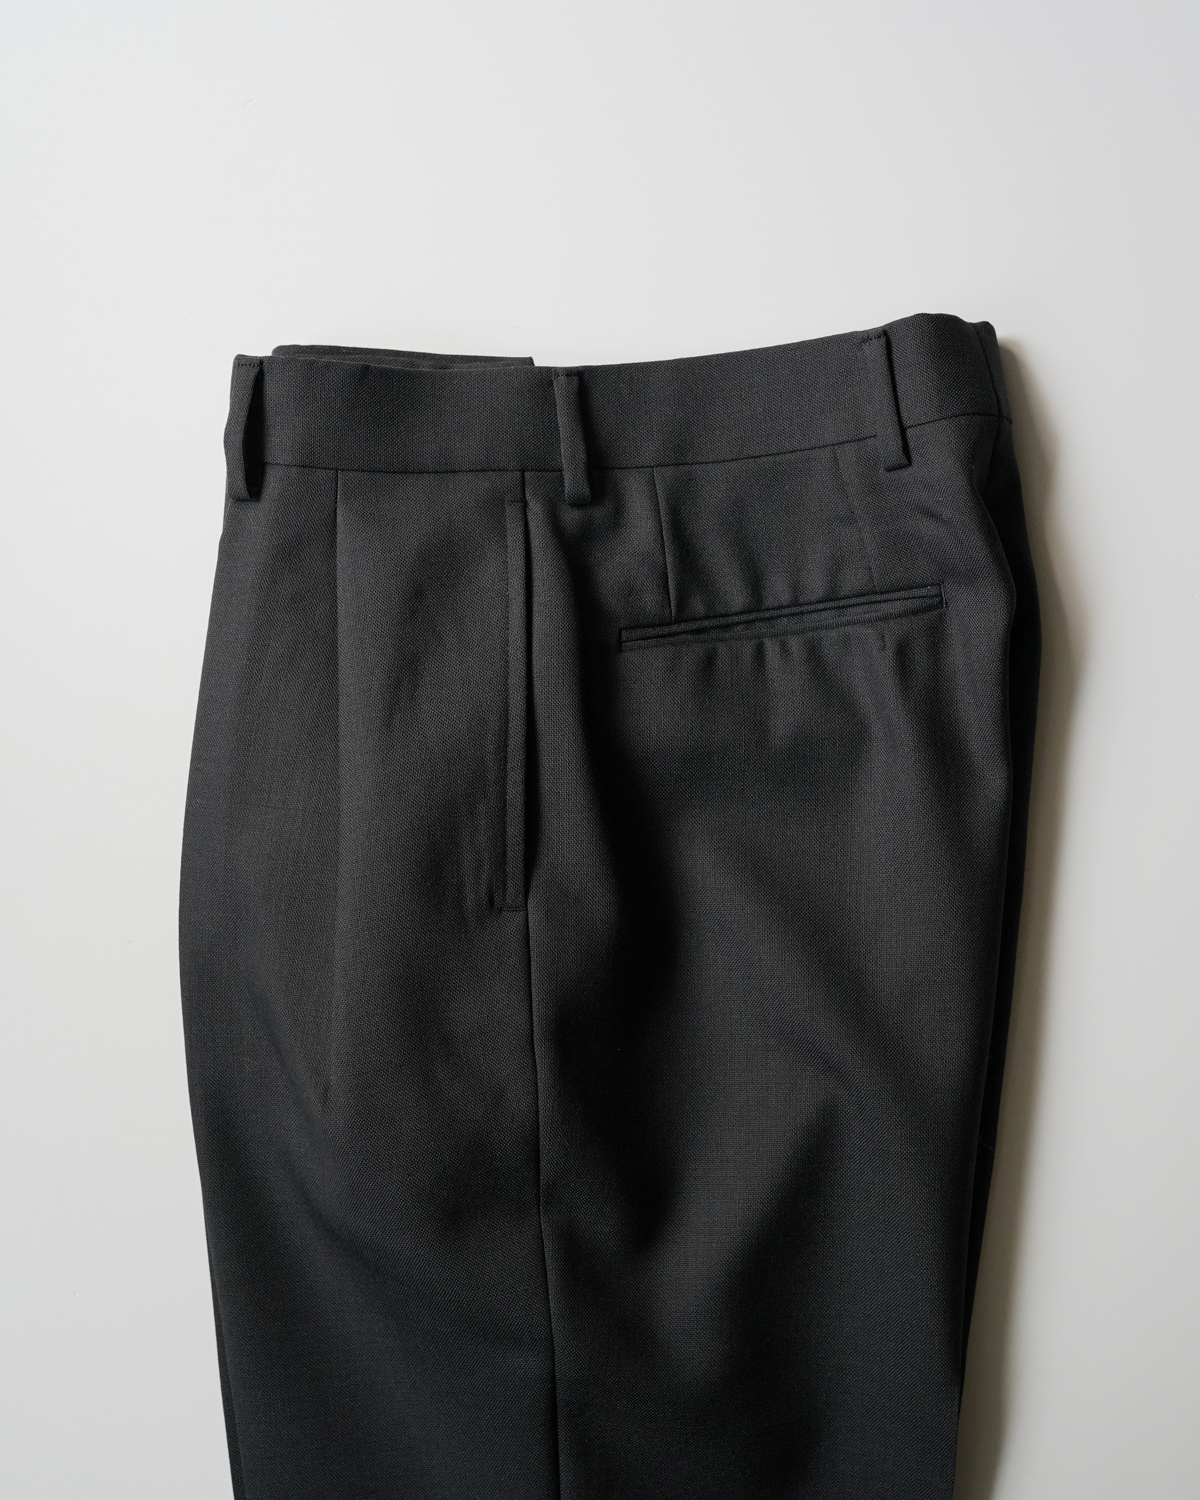 NEAT "HOPSACK / TAPERED" black